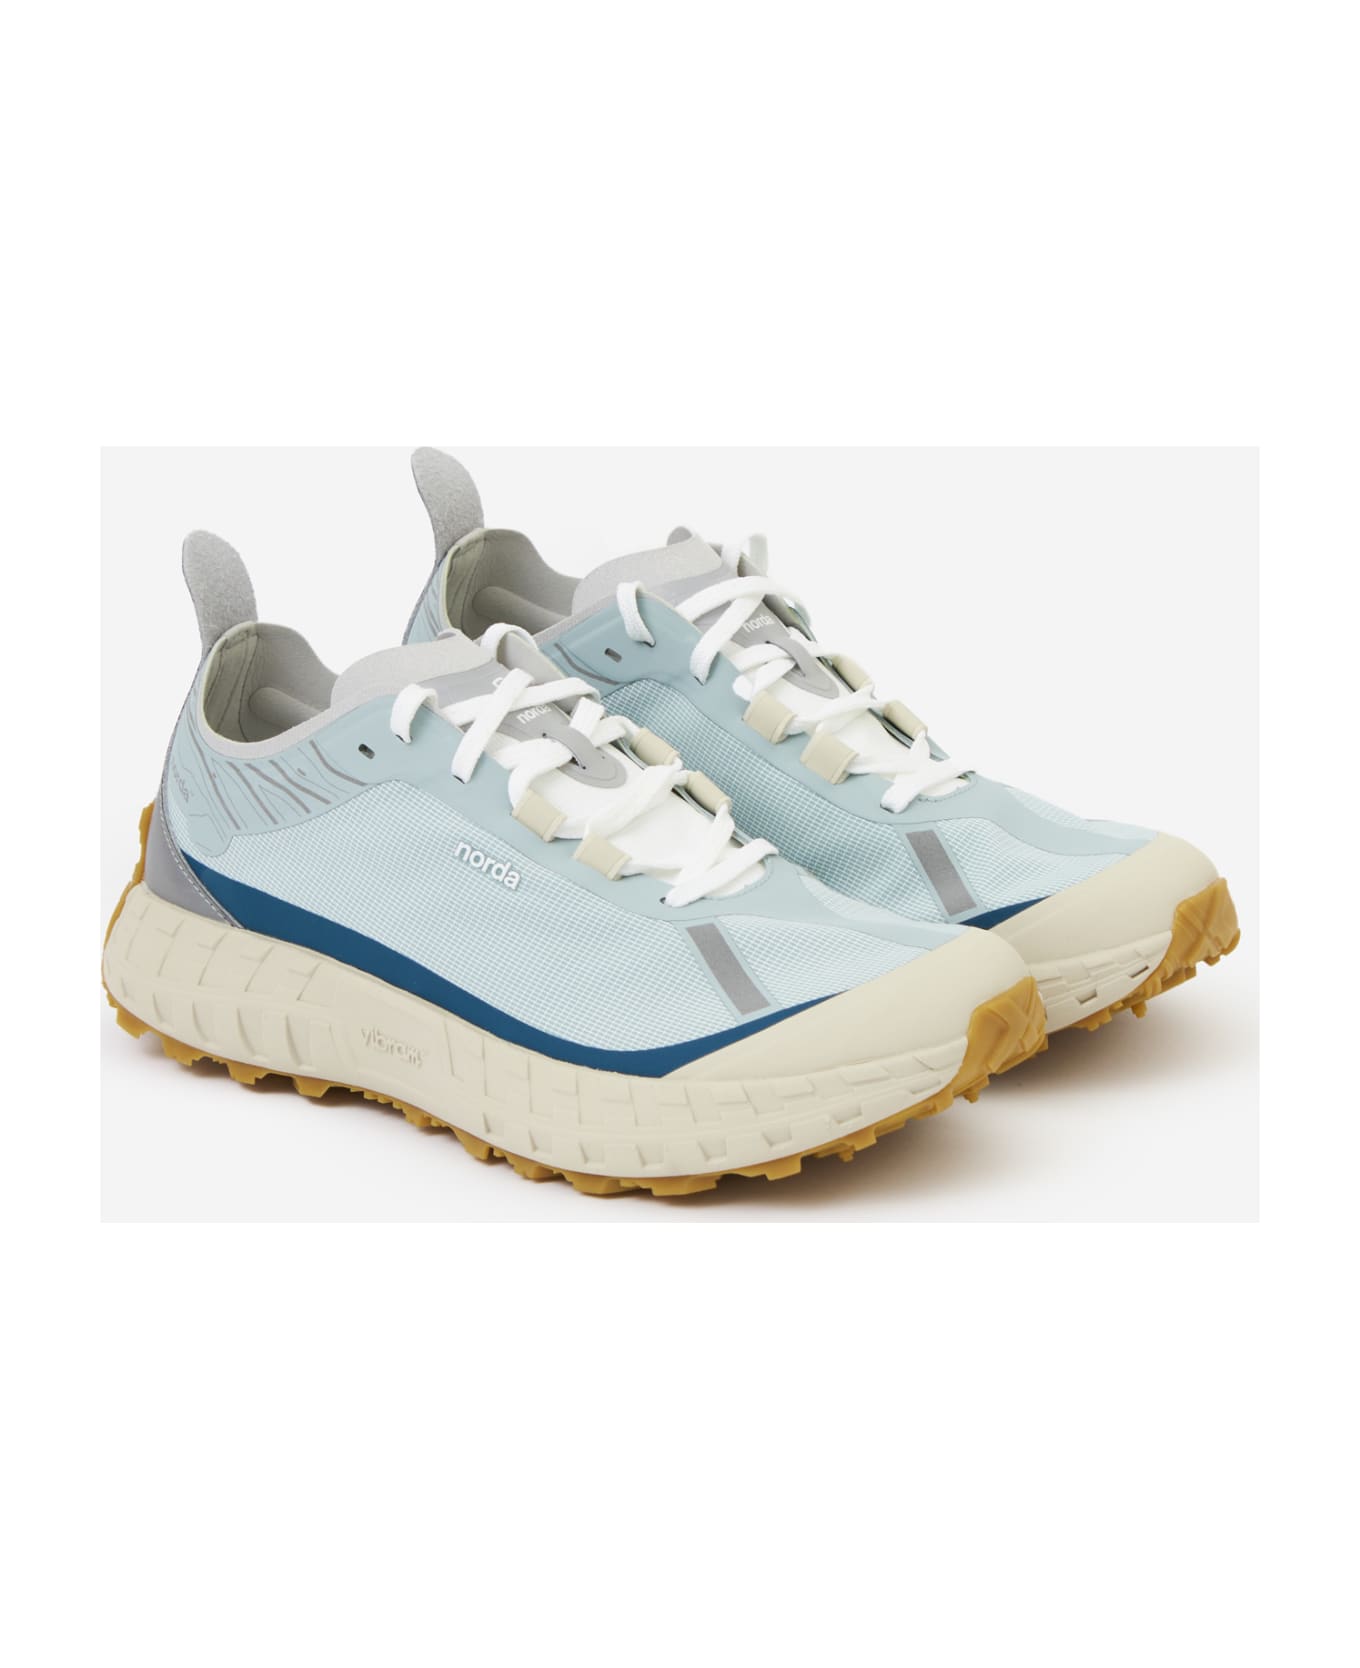 Norda The 001 M Sneakers - turquoise